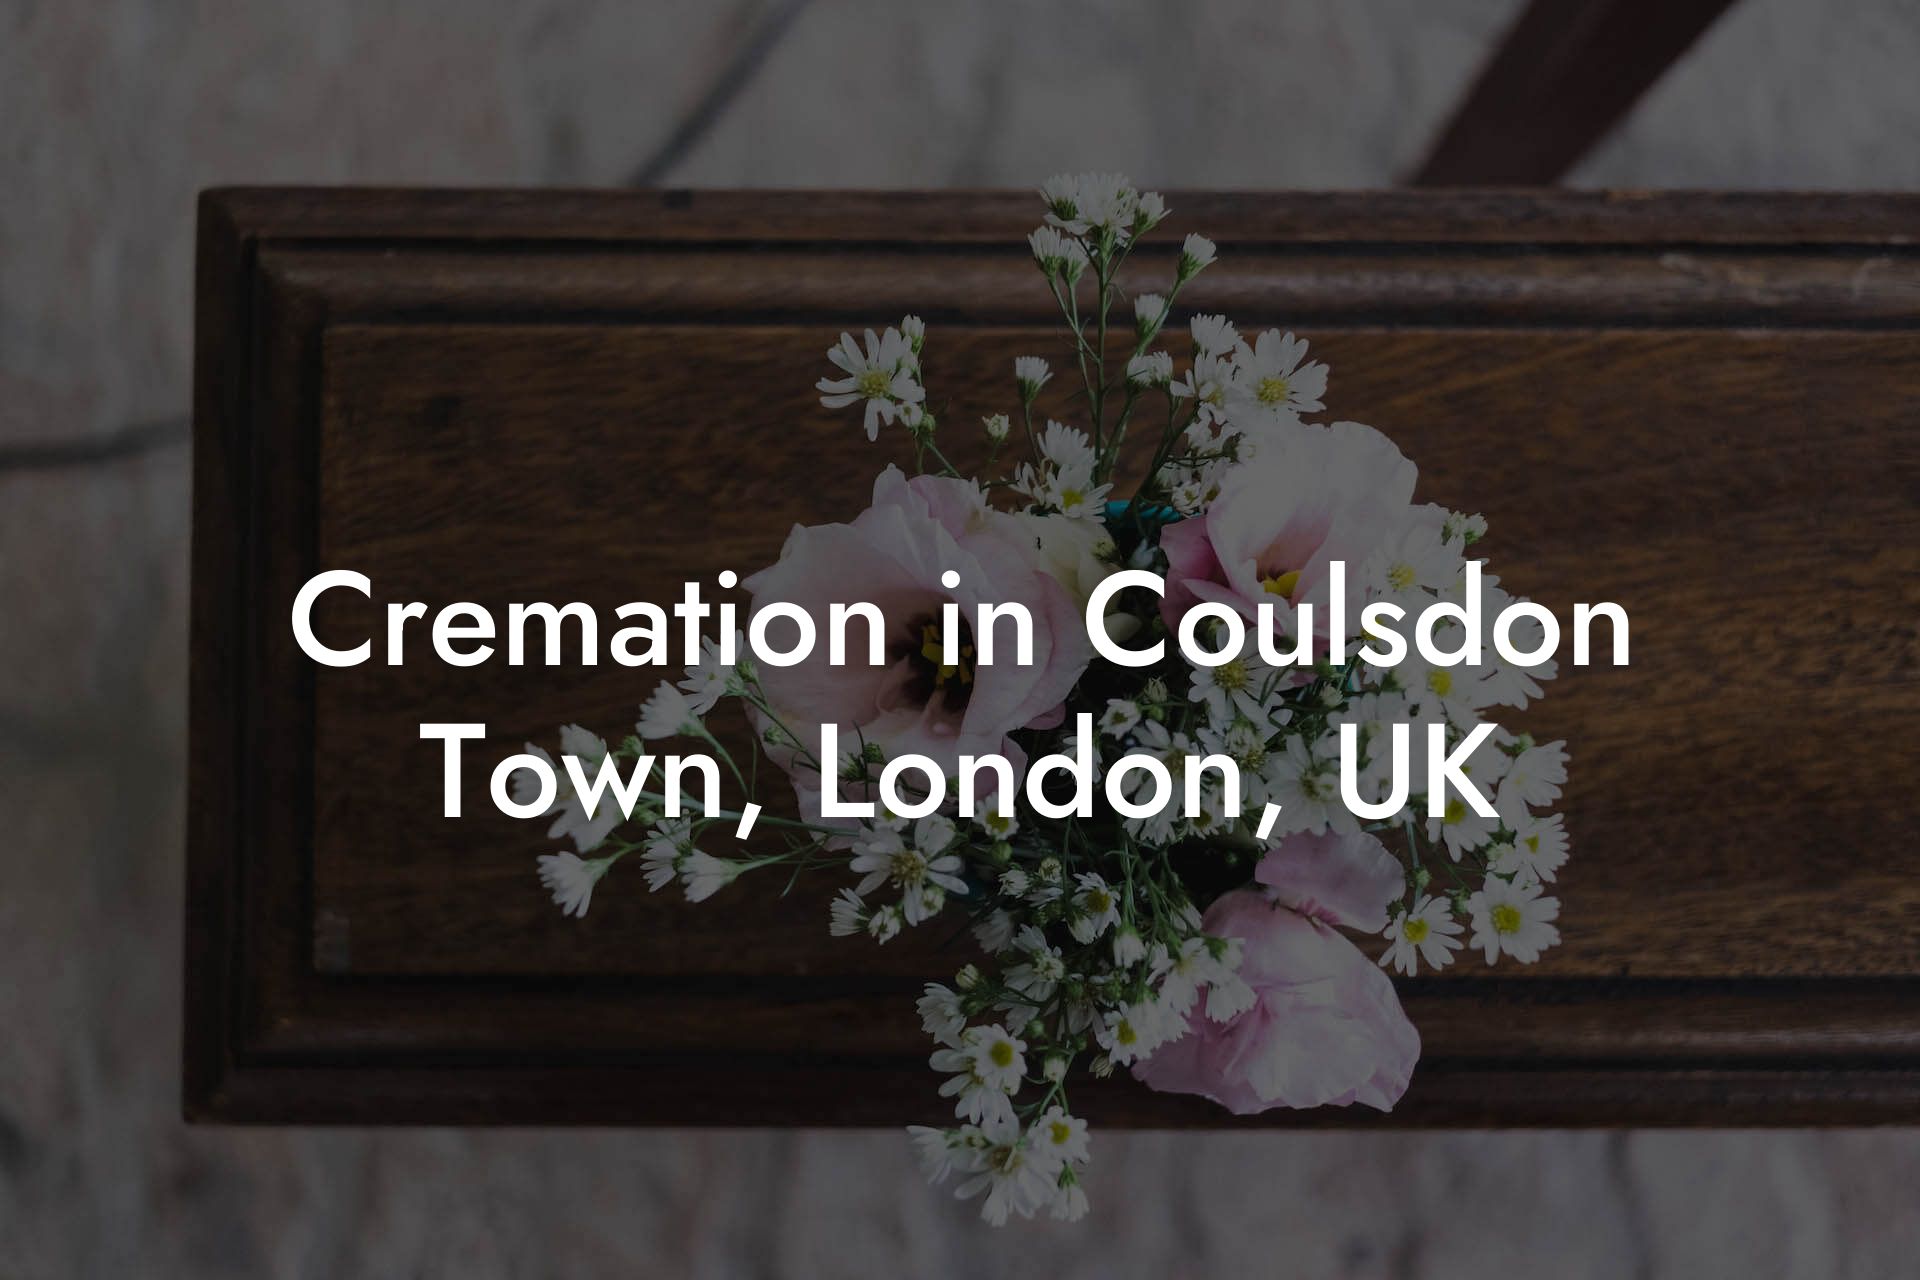 Cremation in Coulsdon Town, London, UK